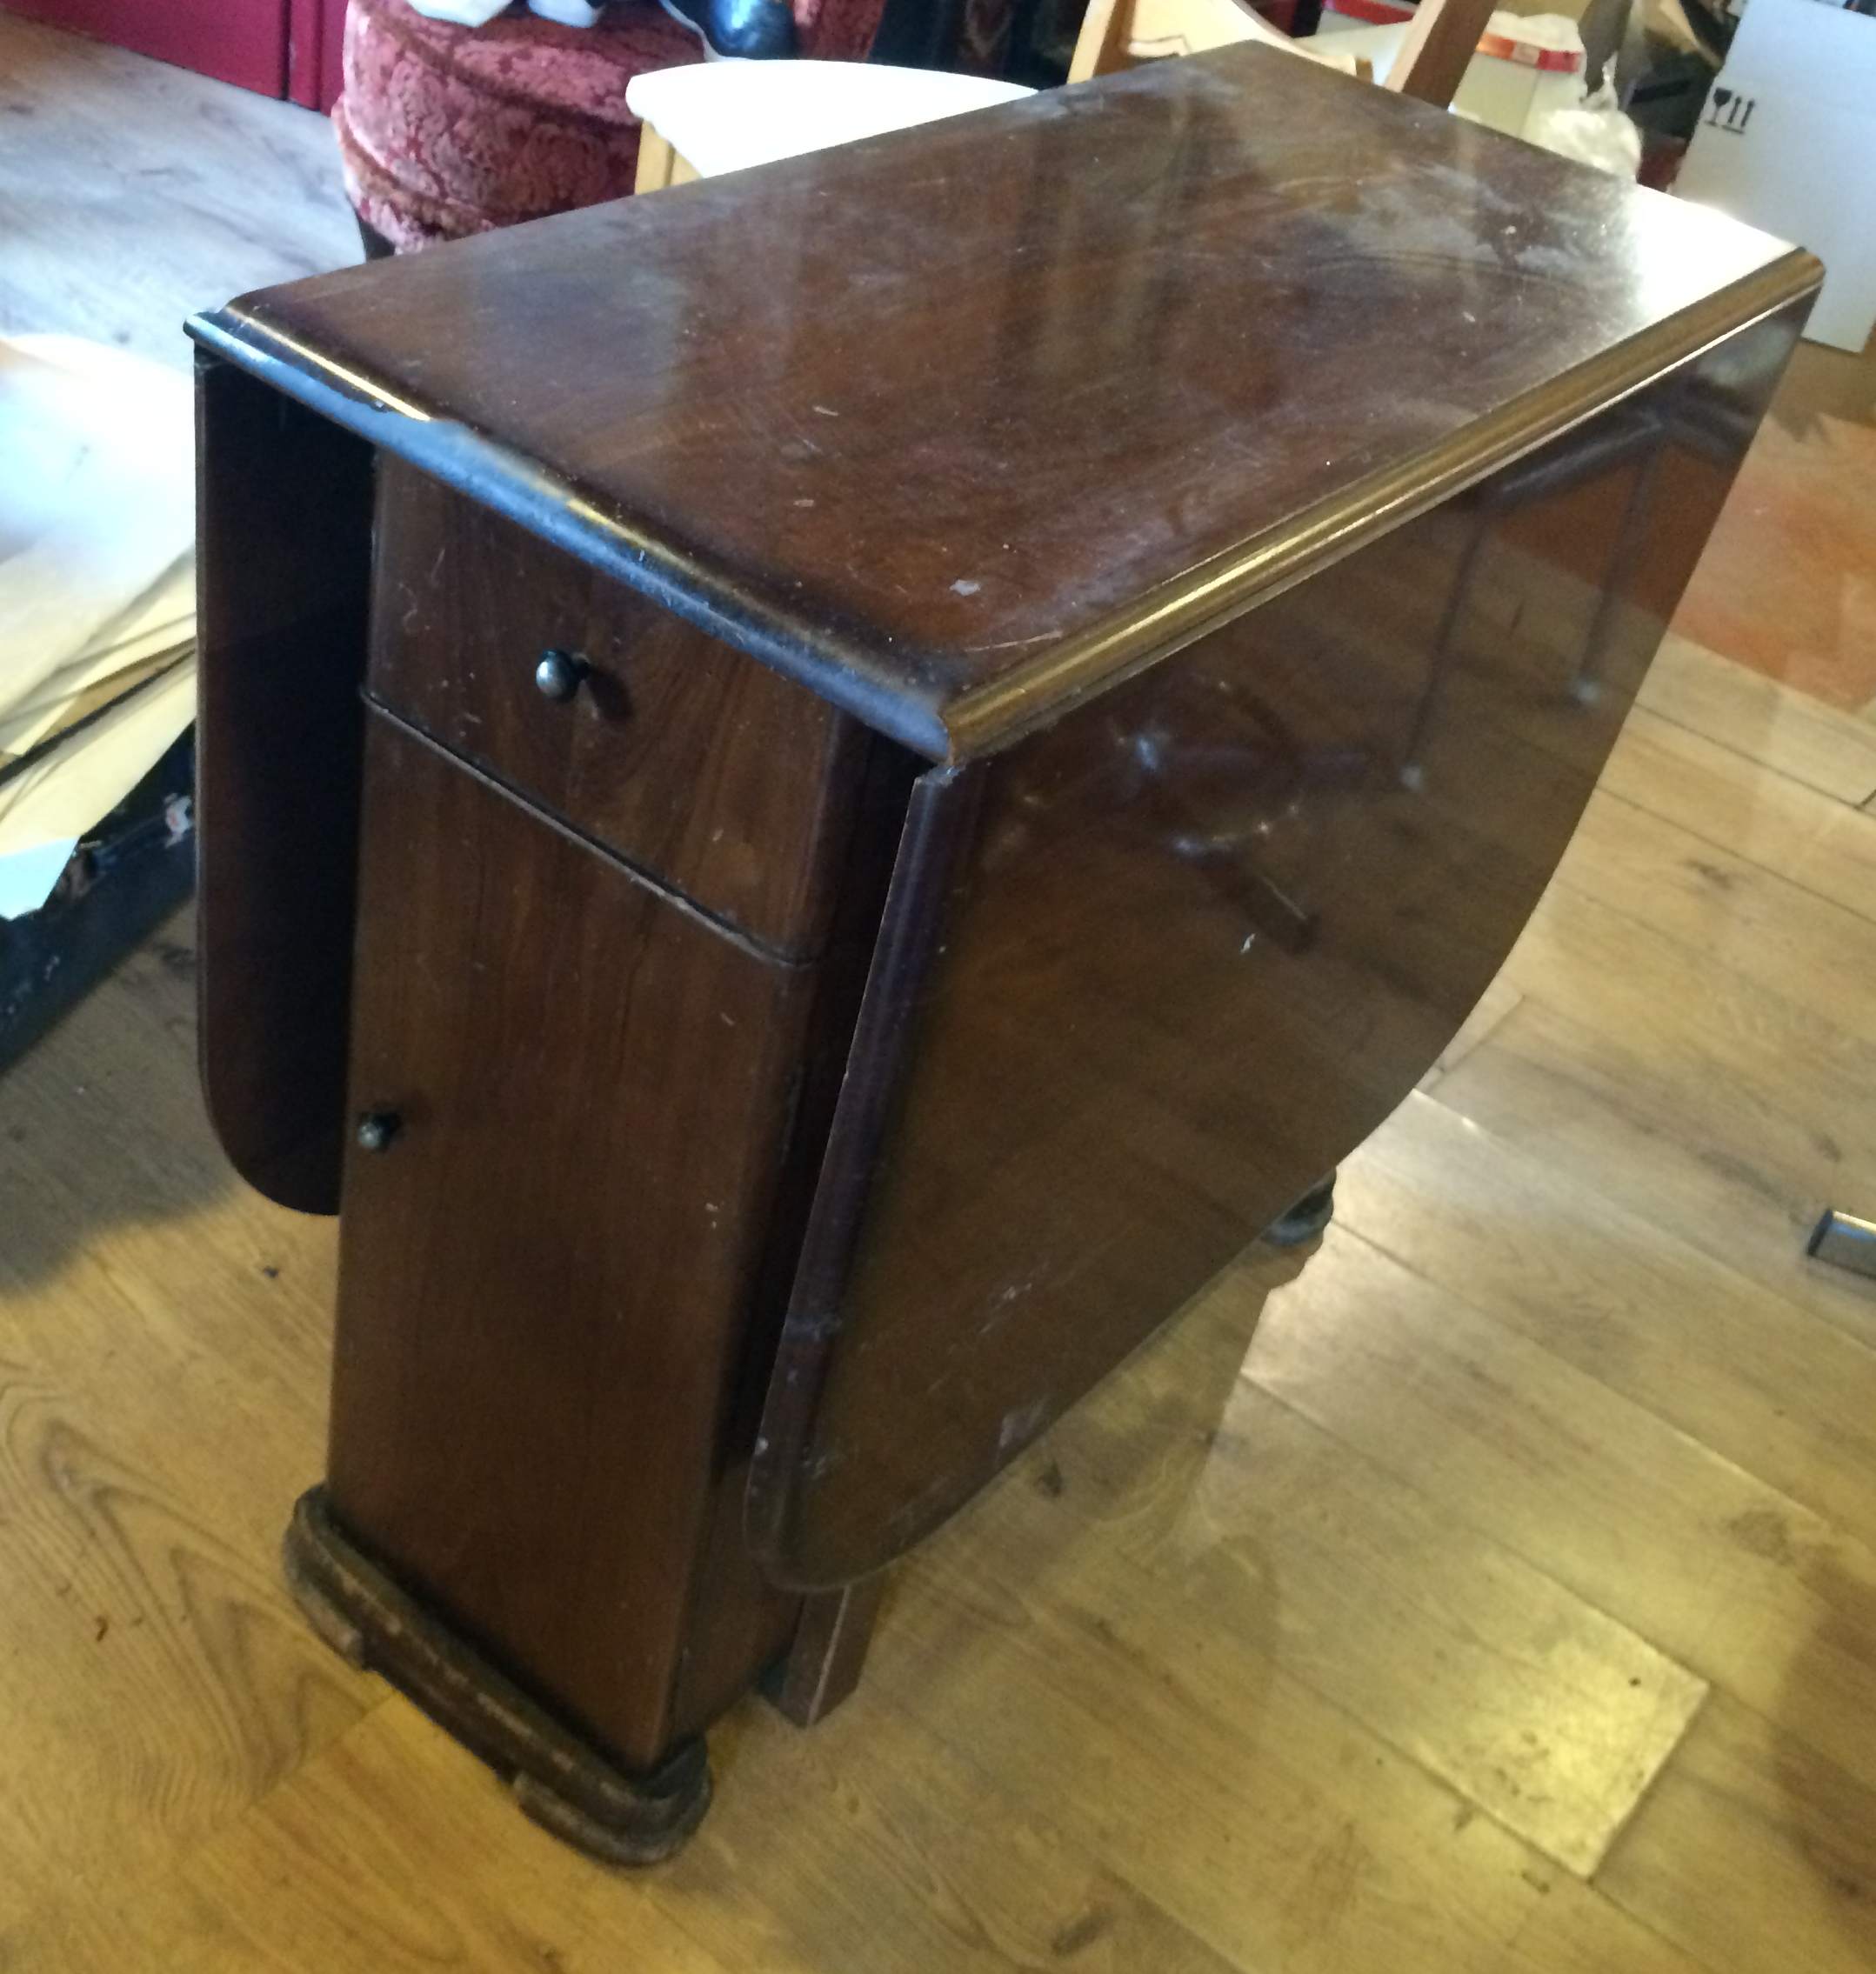 Drop leaf table with cupboard and draws